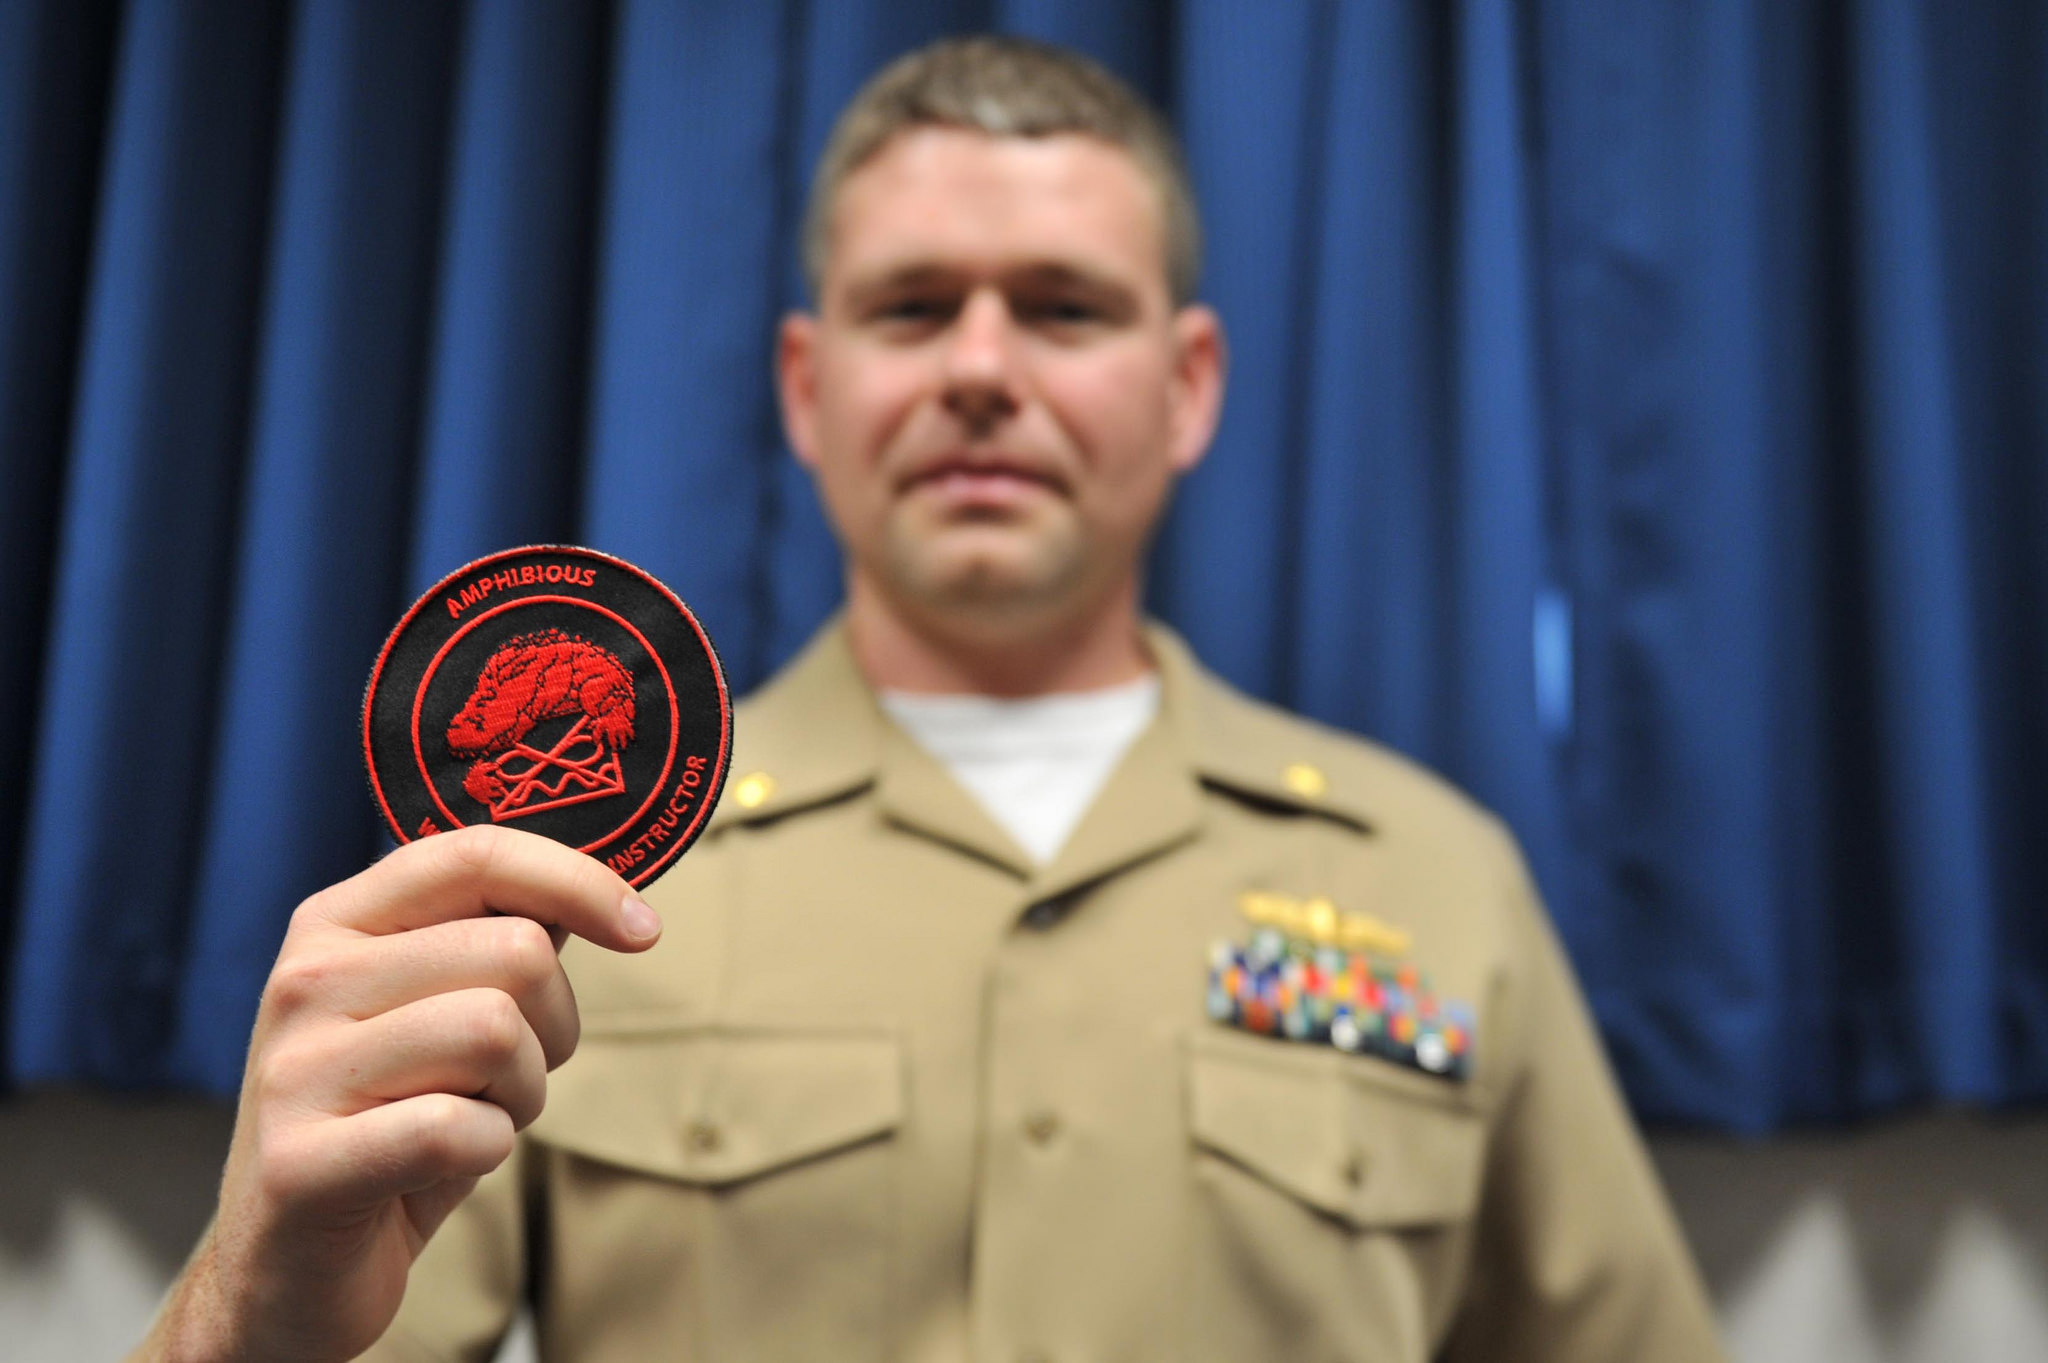 VIRGINIA BEACH, Va. (May 26, 2016) Lt. Cmdr. Dirk Sonnenberg, a graduate of Naval Surface and Mine Warfighting Development Center’s (SMWDC) Amphibious Warfare Tactics Instructor (WTI) course and winner of the course’s Iwo Jima Leadership Award, showcases the patch he and his classmates received upon graduating from the 14-week course. SMWDC is increasing the tactical proficiency of the surface warfare community by selecting elite surface warfare officers to become specialized warfighters called Warfare Tactics Instructors (WTI). (U.S. Navy photo by Mass Communication Specialist 2nd Class Jamie V. 